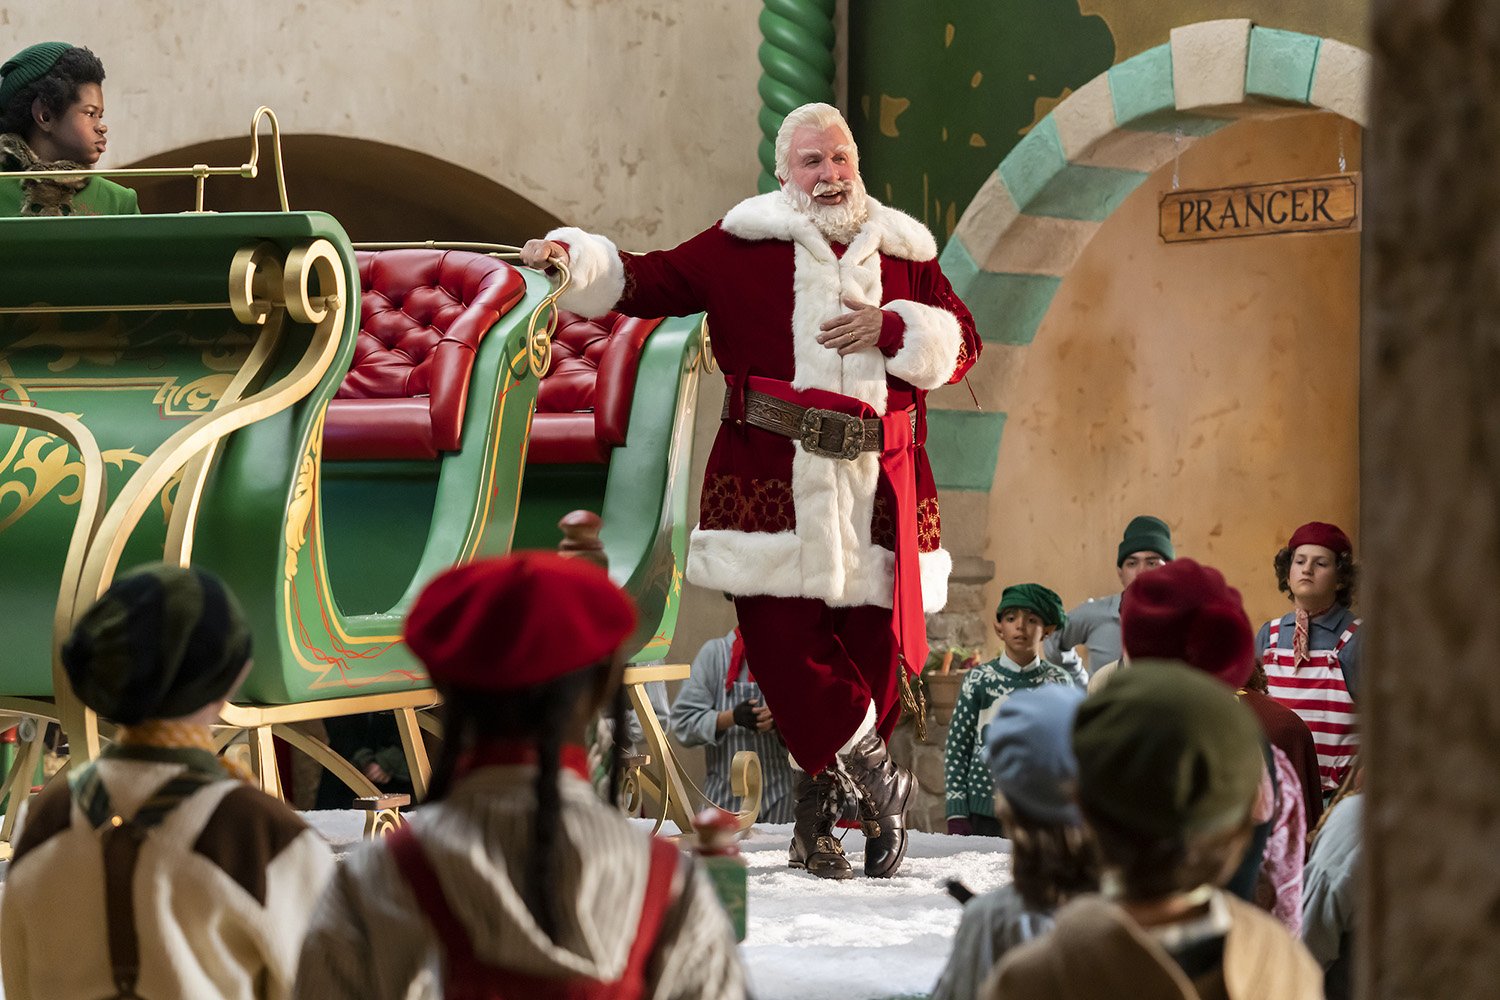 Tim Allen as Santa Clause surrounded by elves and his sleigh in The Santa Clauses.